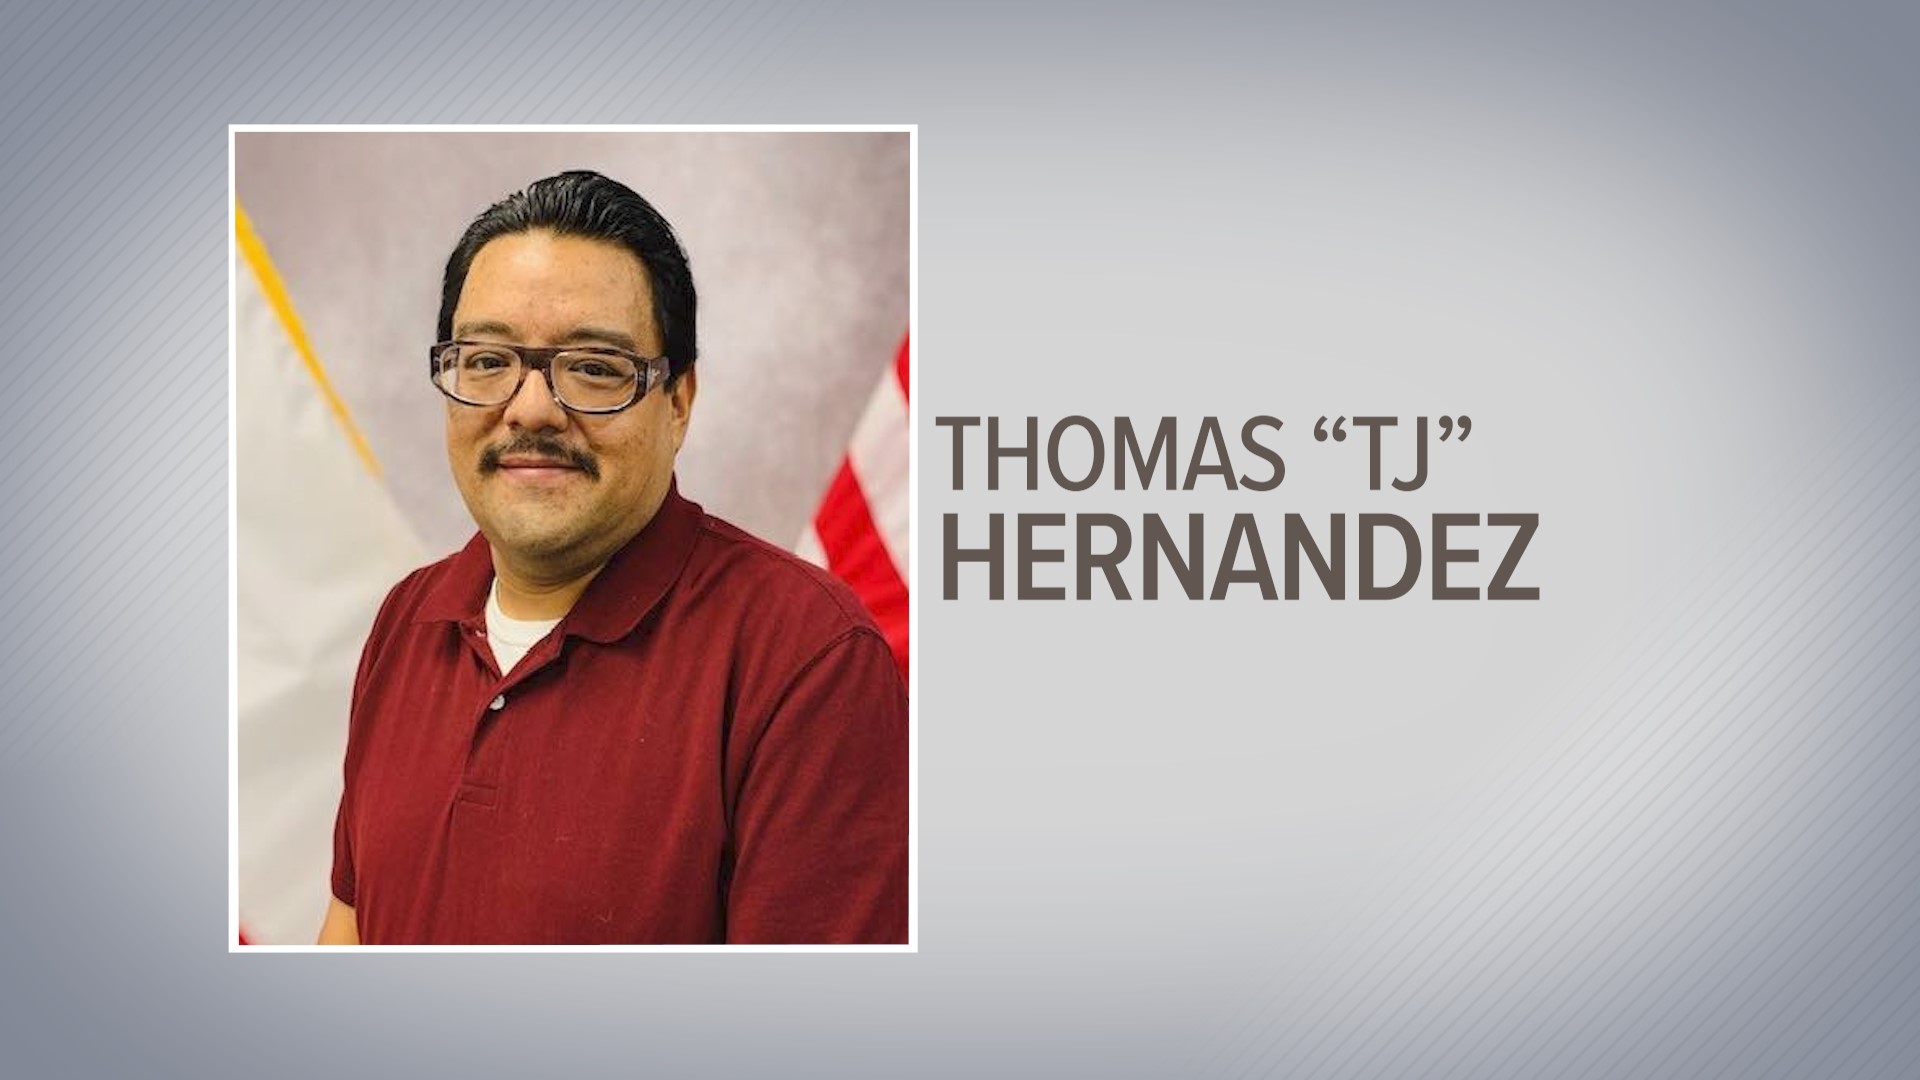 Thomas "TJ" Hernandez passed away Thanksgiving morning after he suffered a medical emergency, according to Austin ISD police.